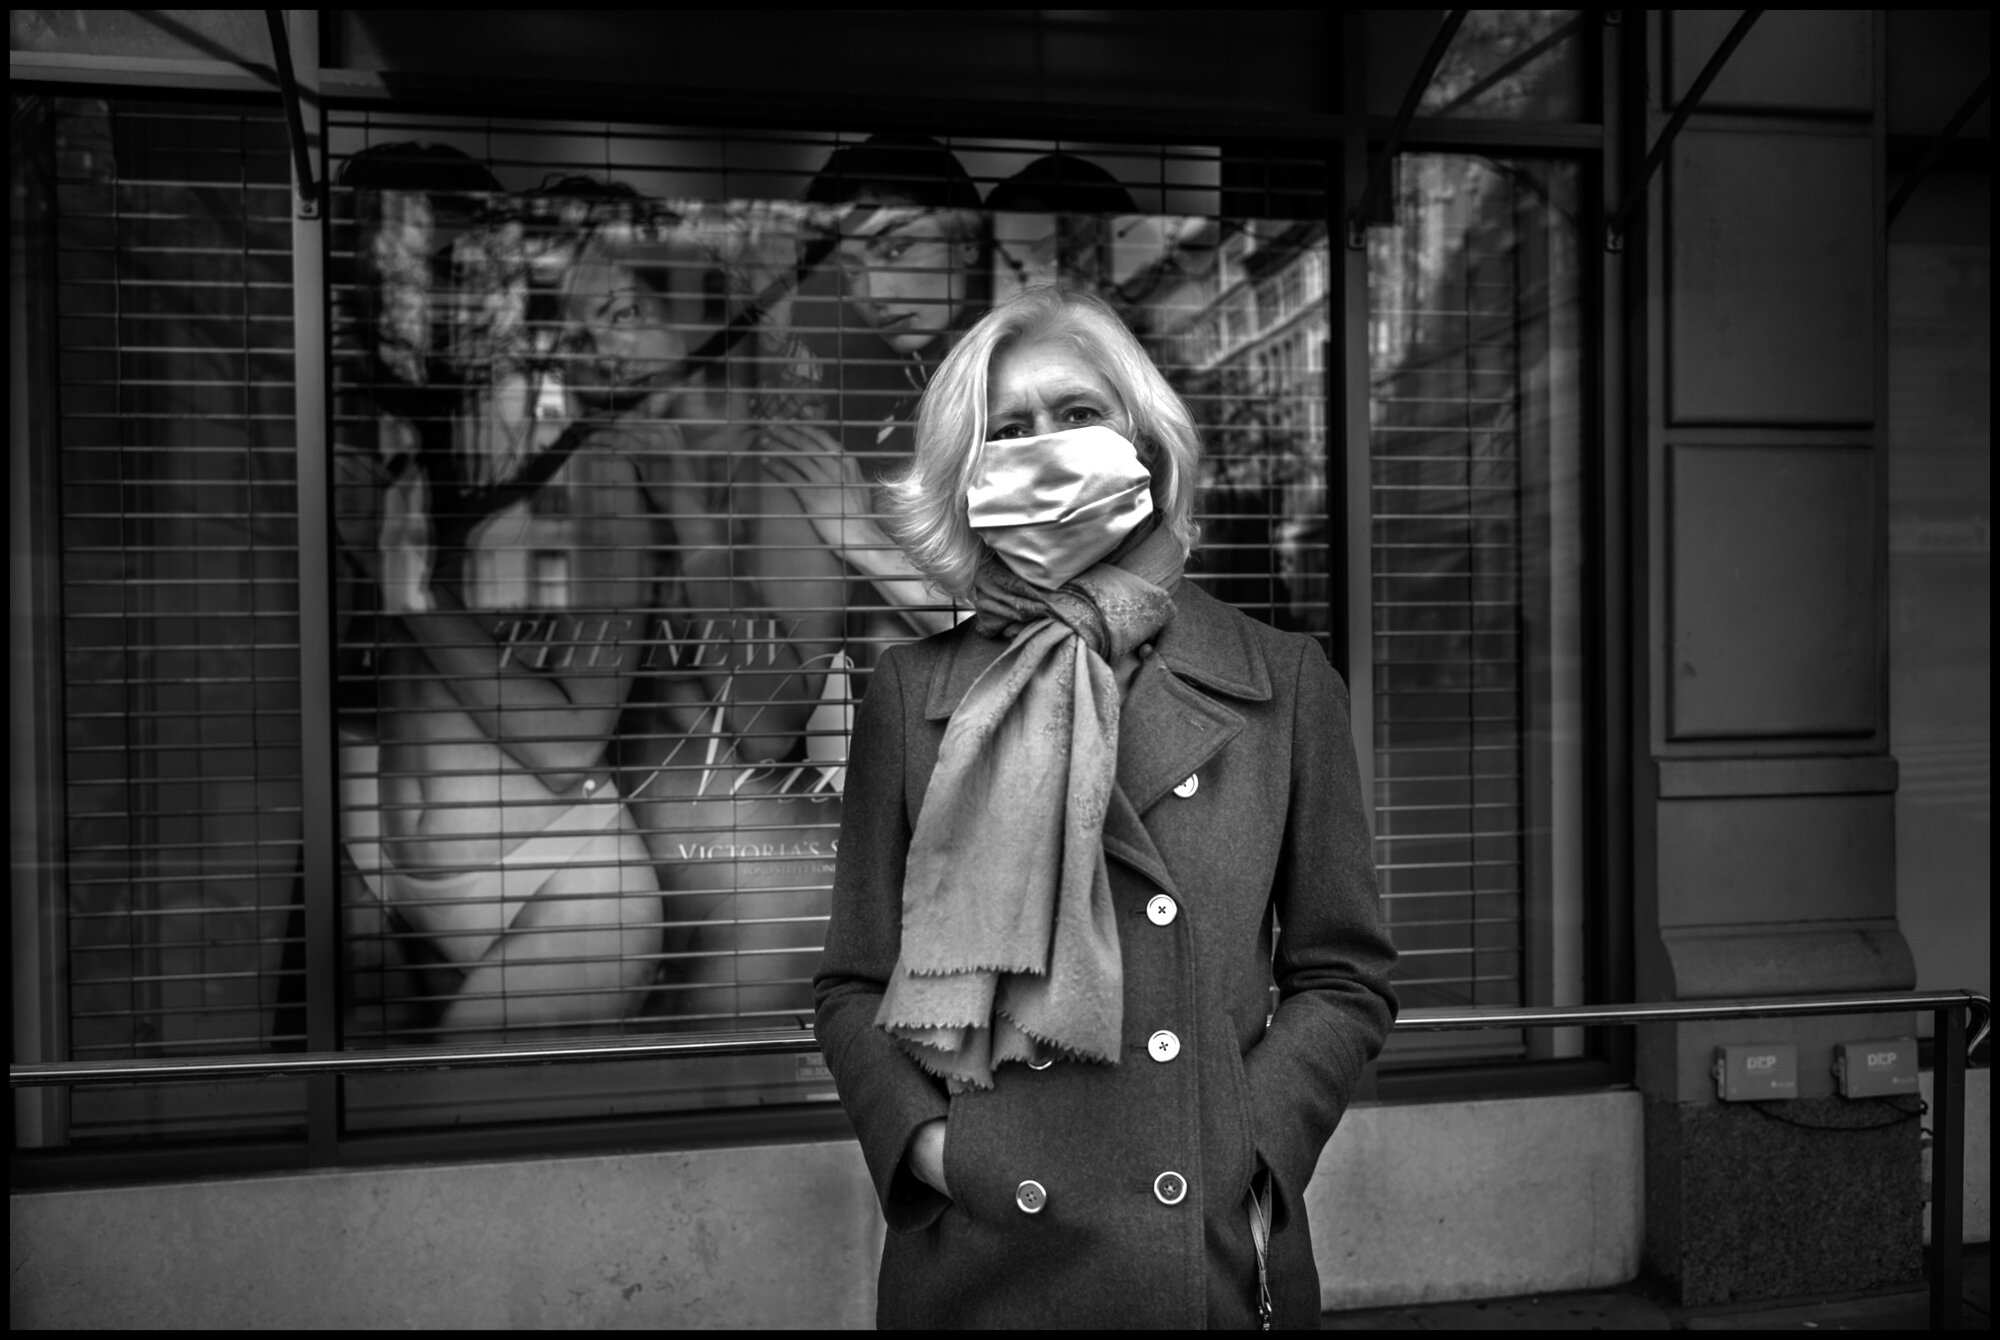  Gretchen.  April 12, 2020. © Peter Turnley  ID# 19-002 